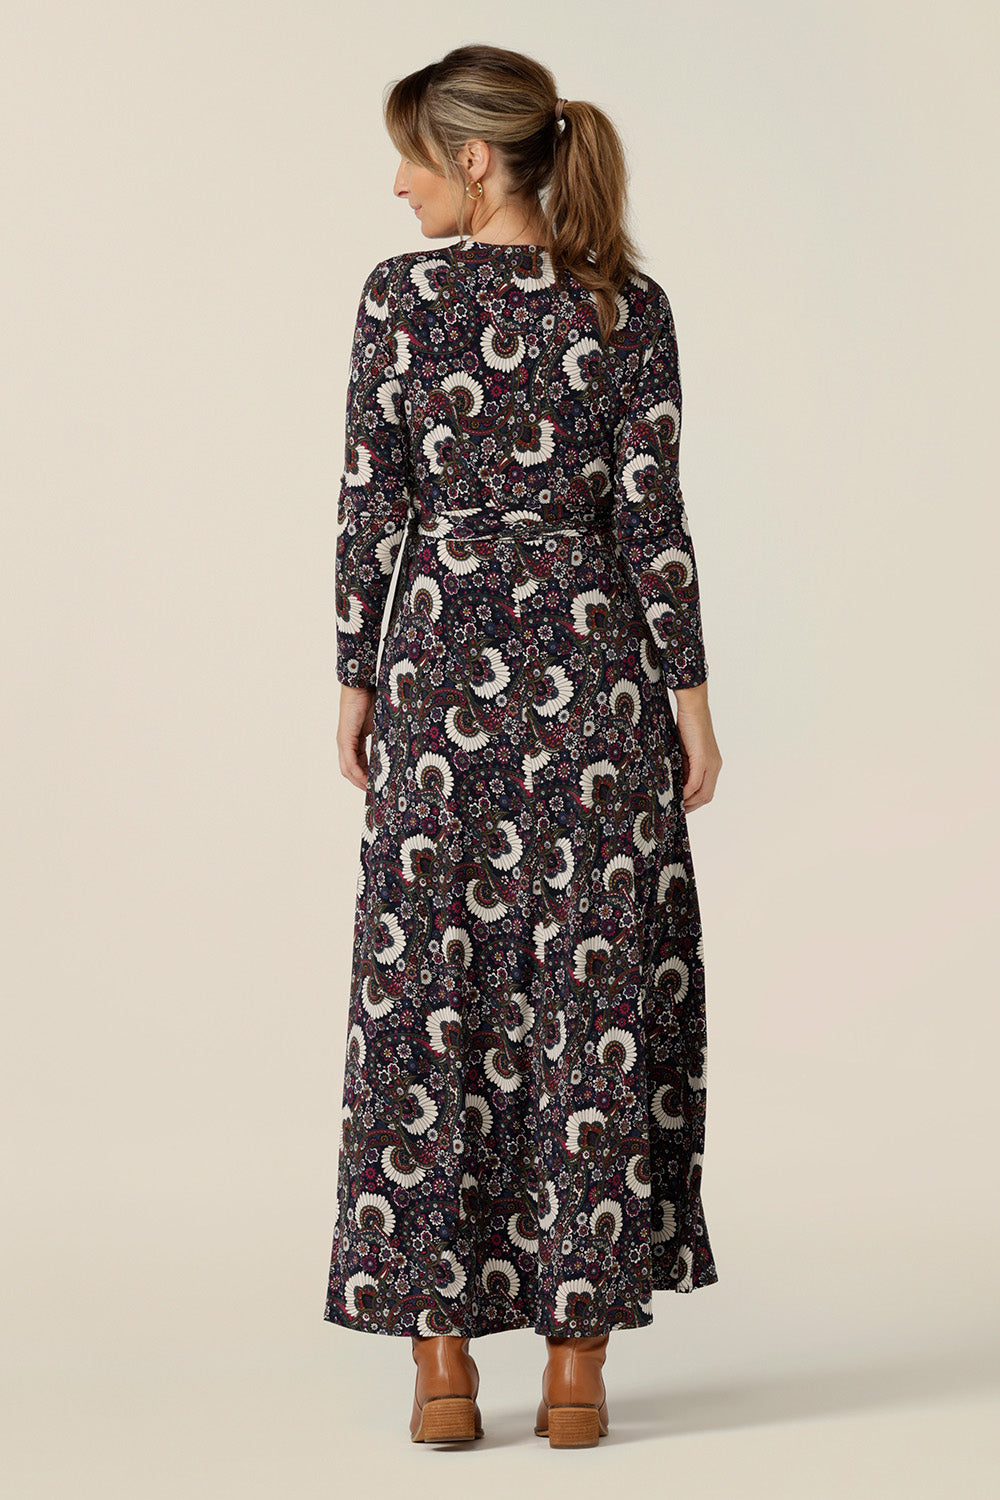 Back view of a maxi dress by Australian and New Zealand women's clothing label, L&F. The Kimberley maxi dress has long sleeves, pockets and a V-neck. This full-length, wrap dress comes in paisley print jersey. Designed for fashionable 40 plus women, shop dresses now in sizes 8 to 24.